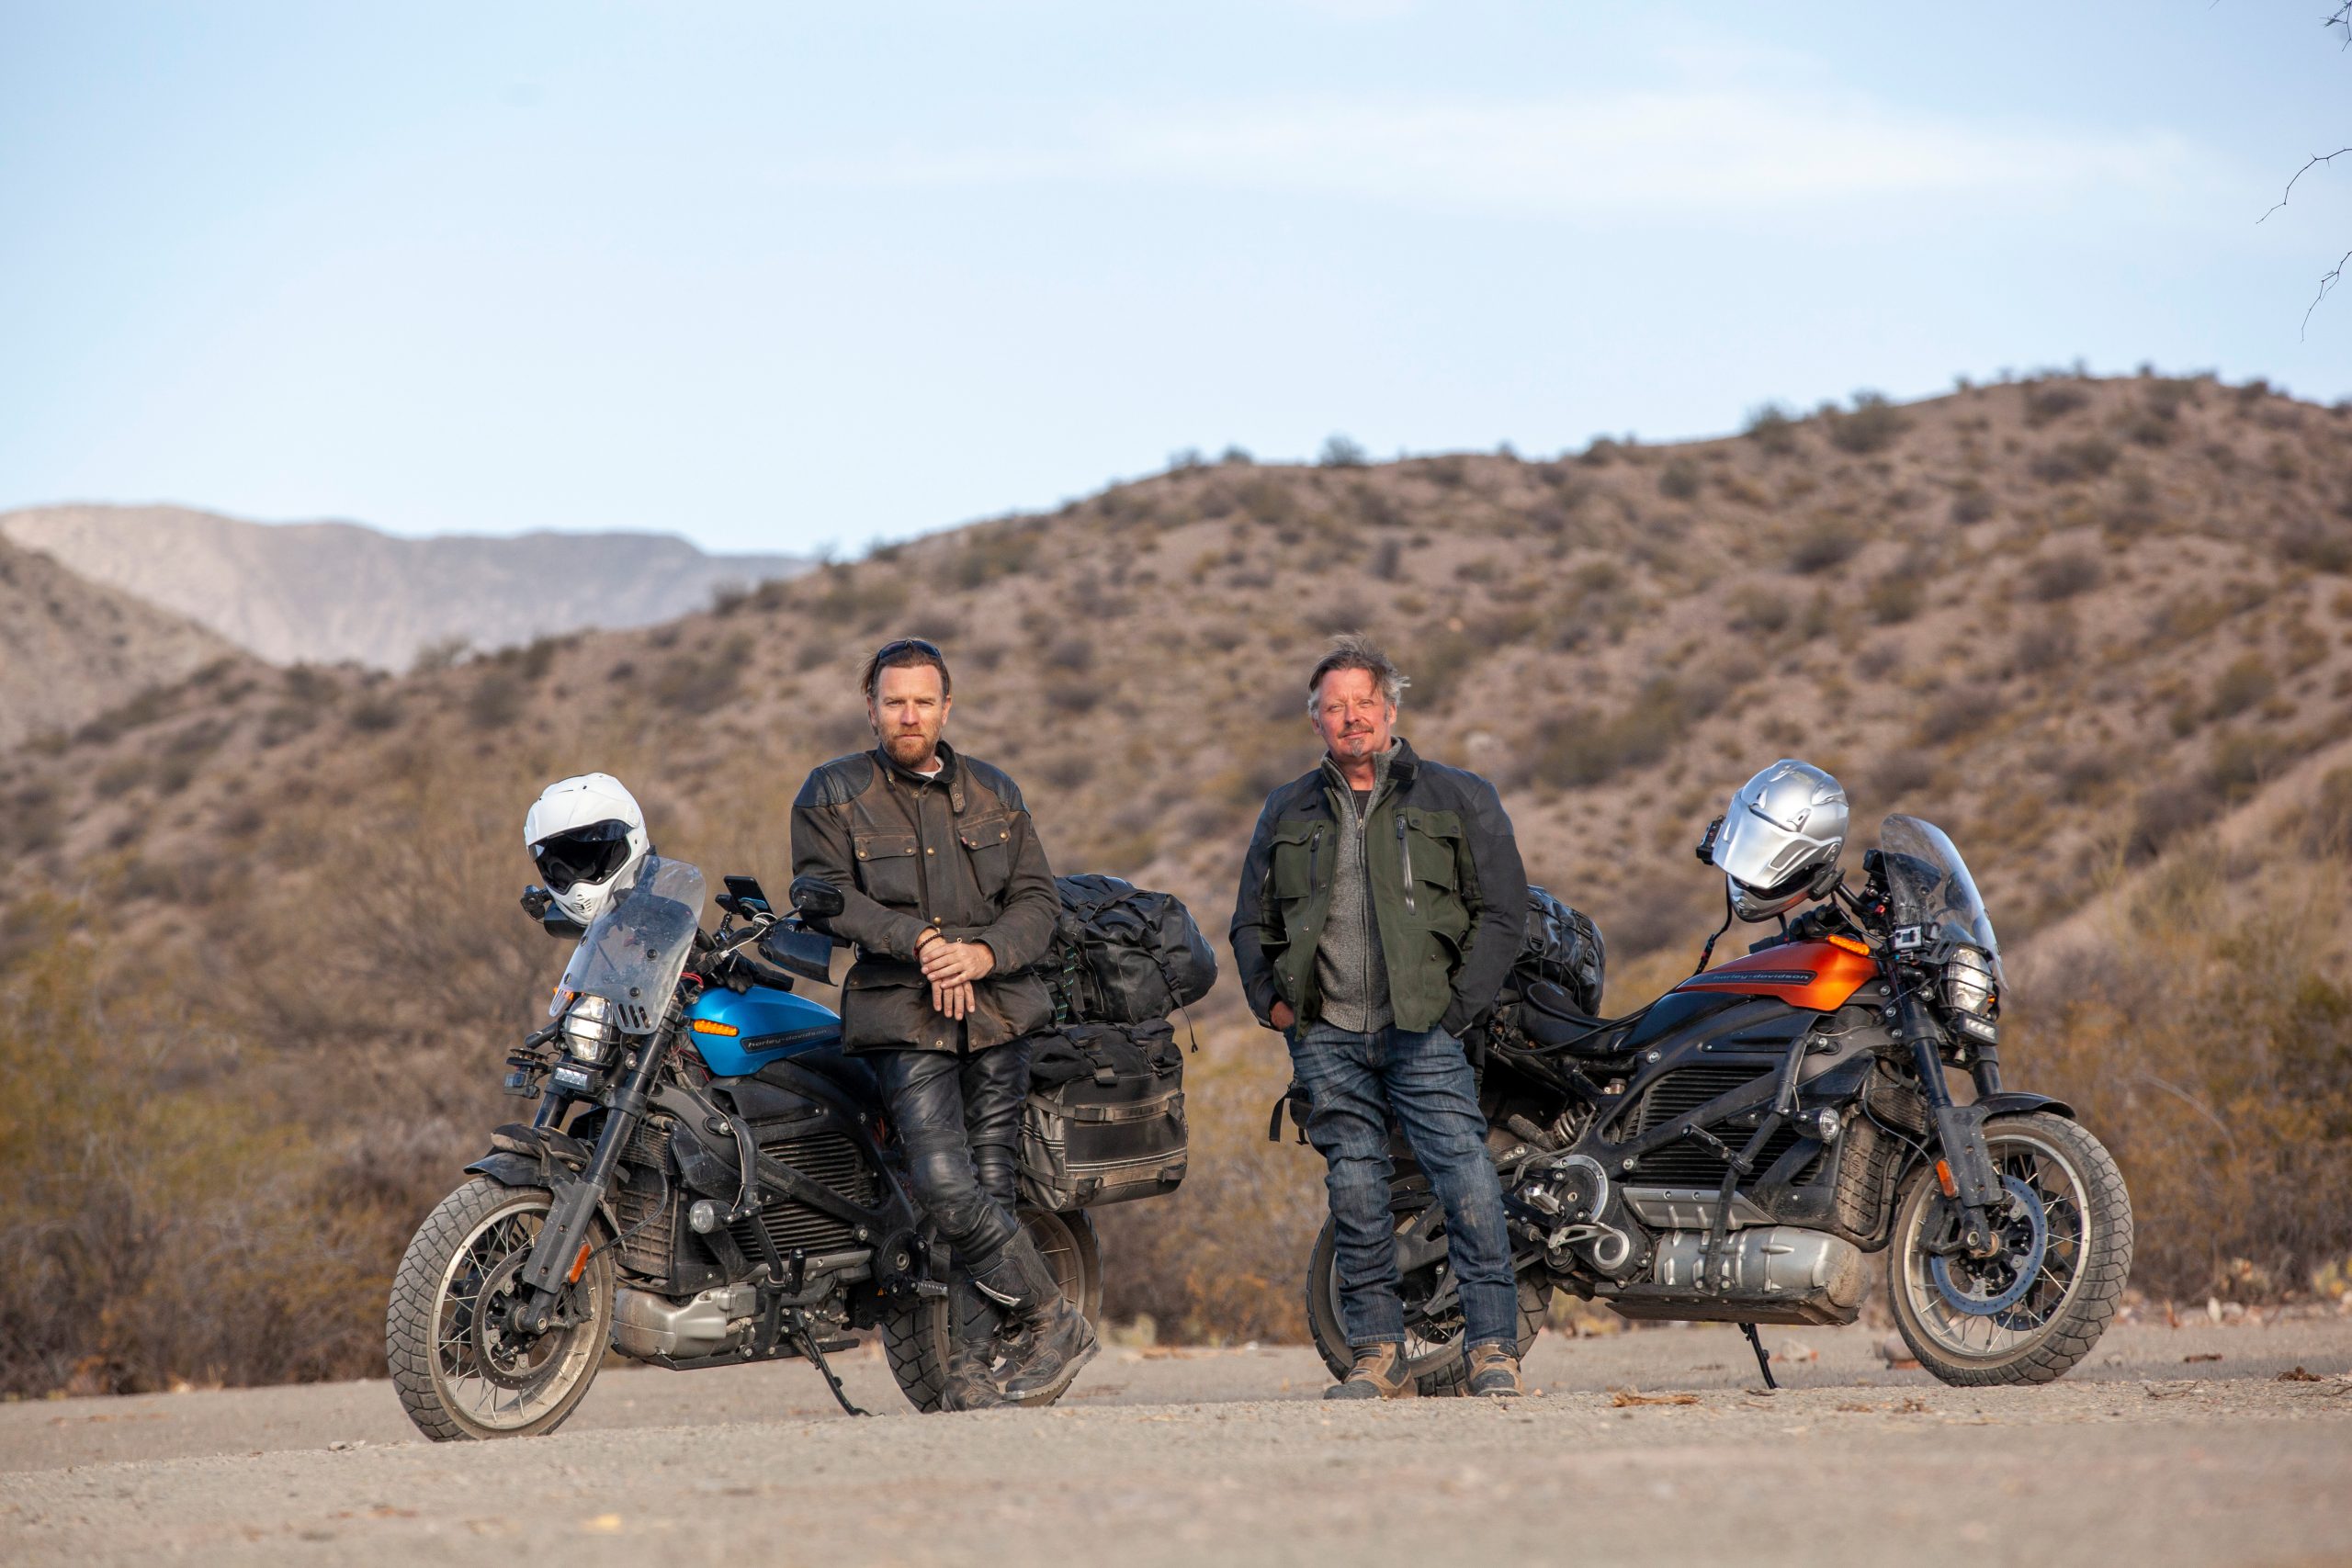 Ewan Mcgregor Goes A Long Way Thanks To Rivian And The Harley Davidson Livewire